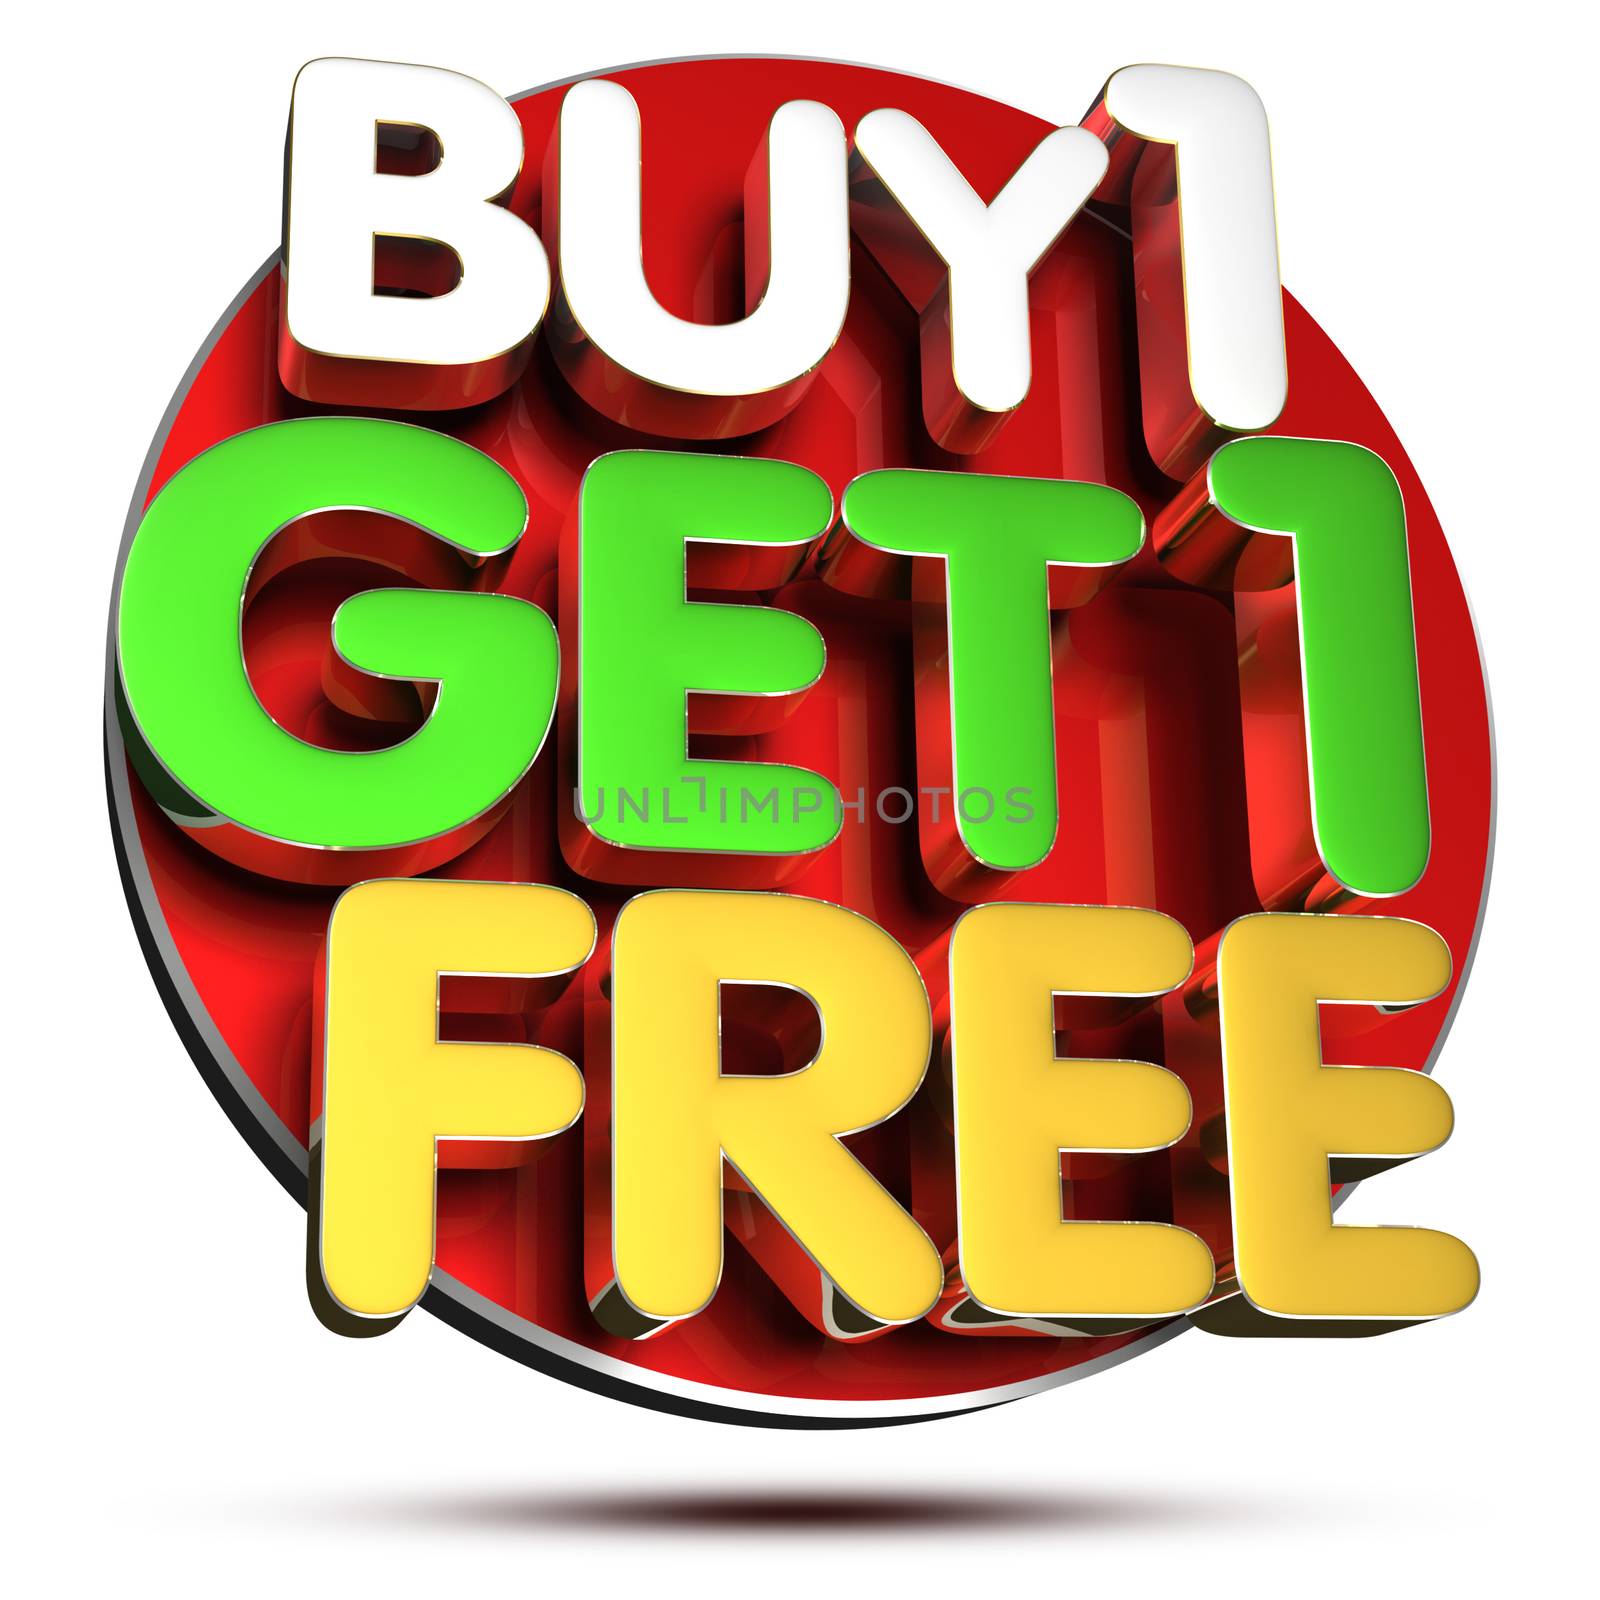 Buy 1 Get 1 Free 3D rendering on white background.